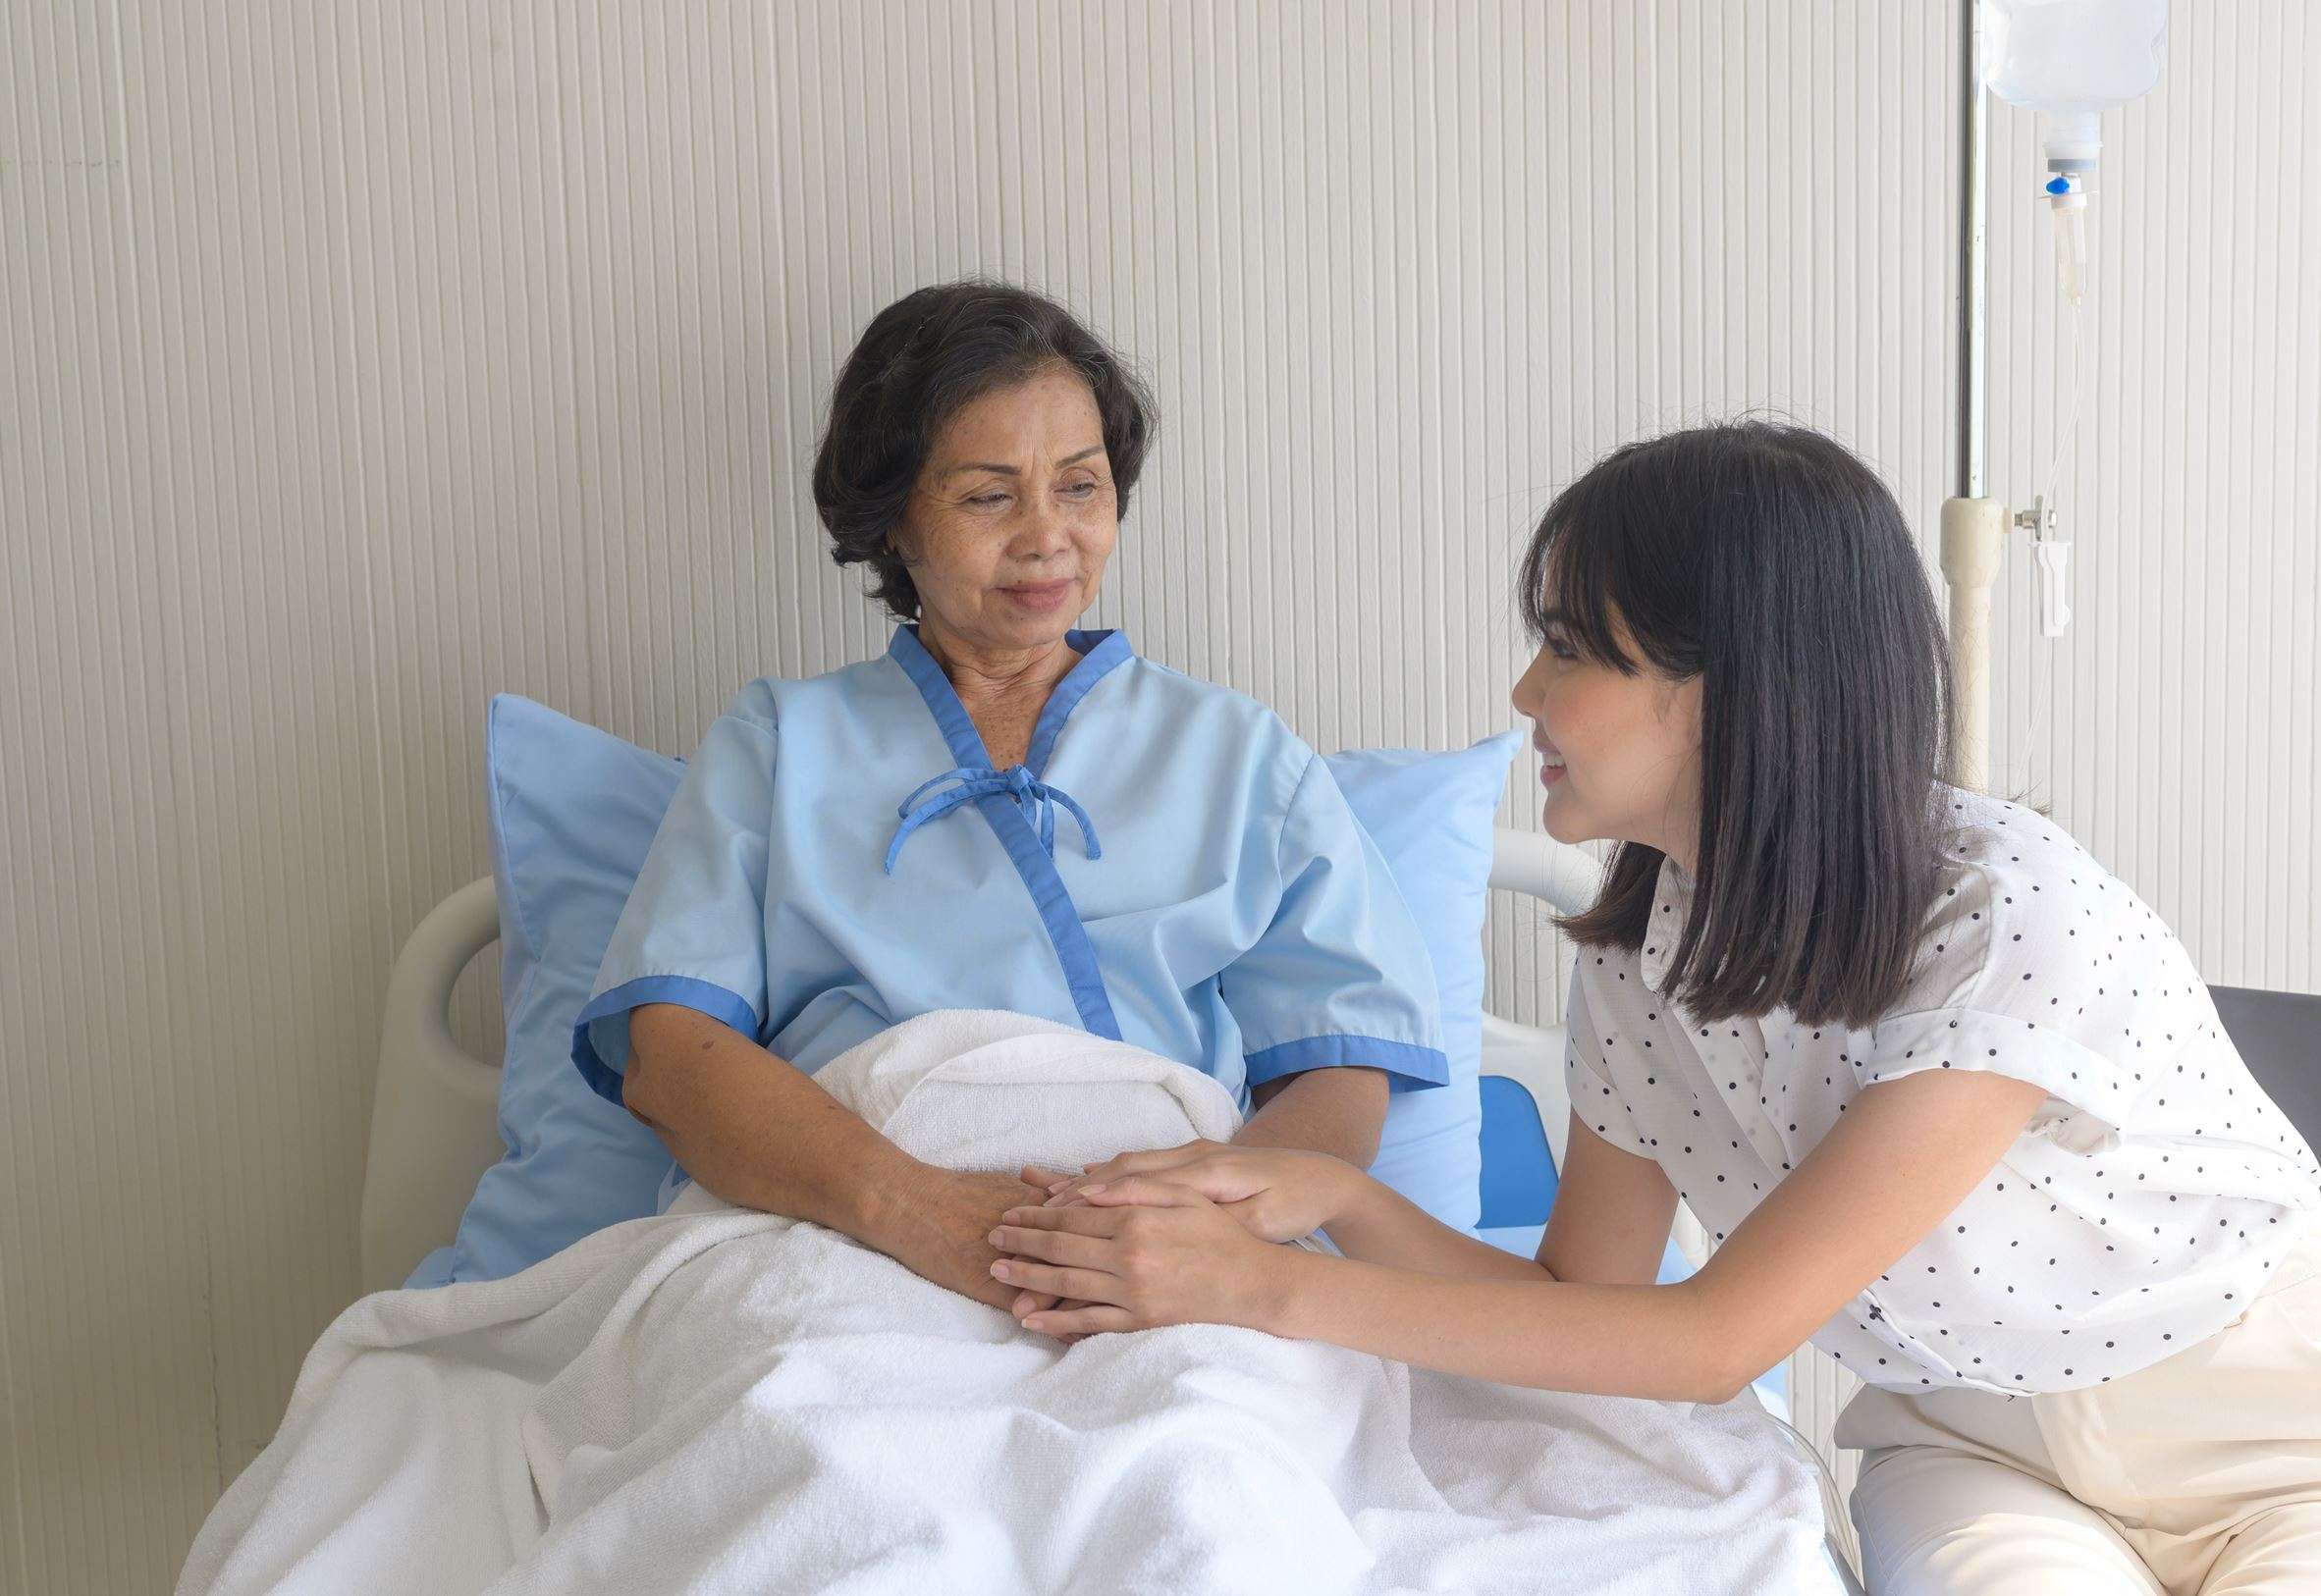 How Can A Hospice Chaplain Support A Patient Who Is Not Religious?